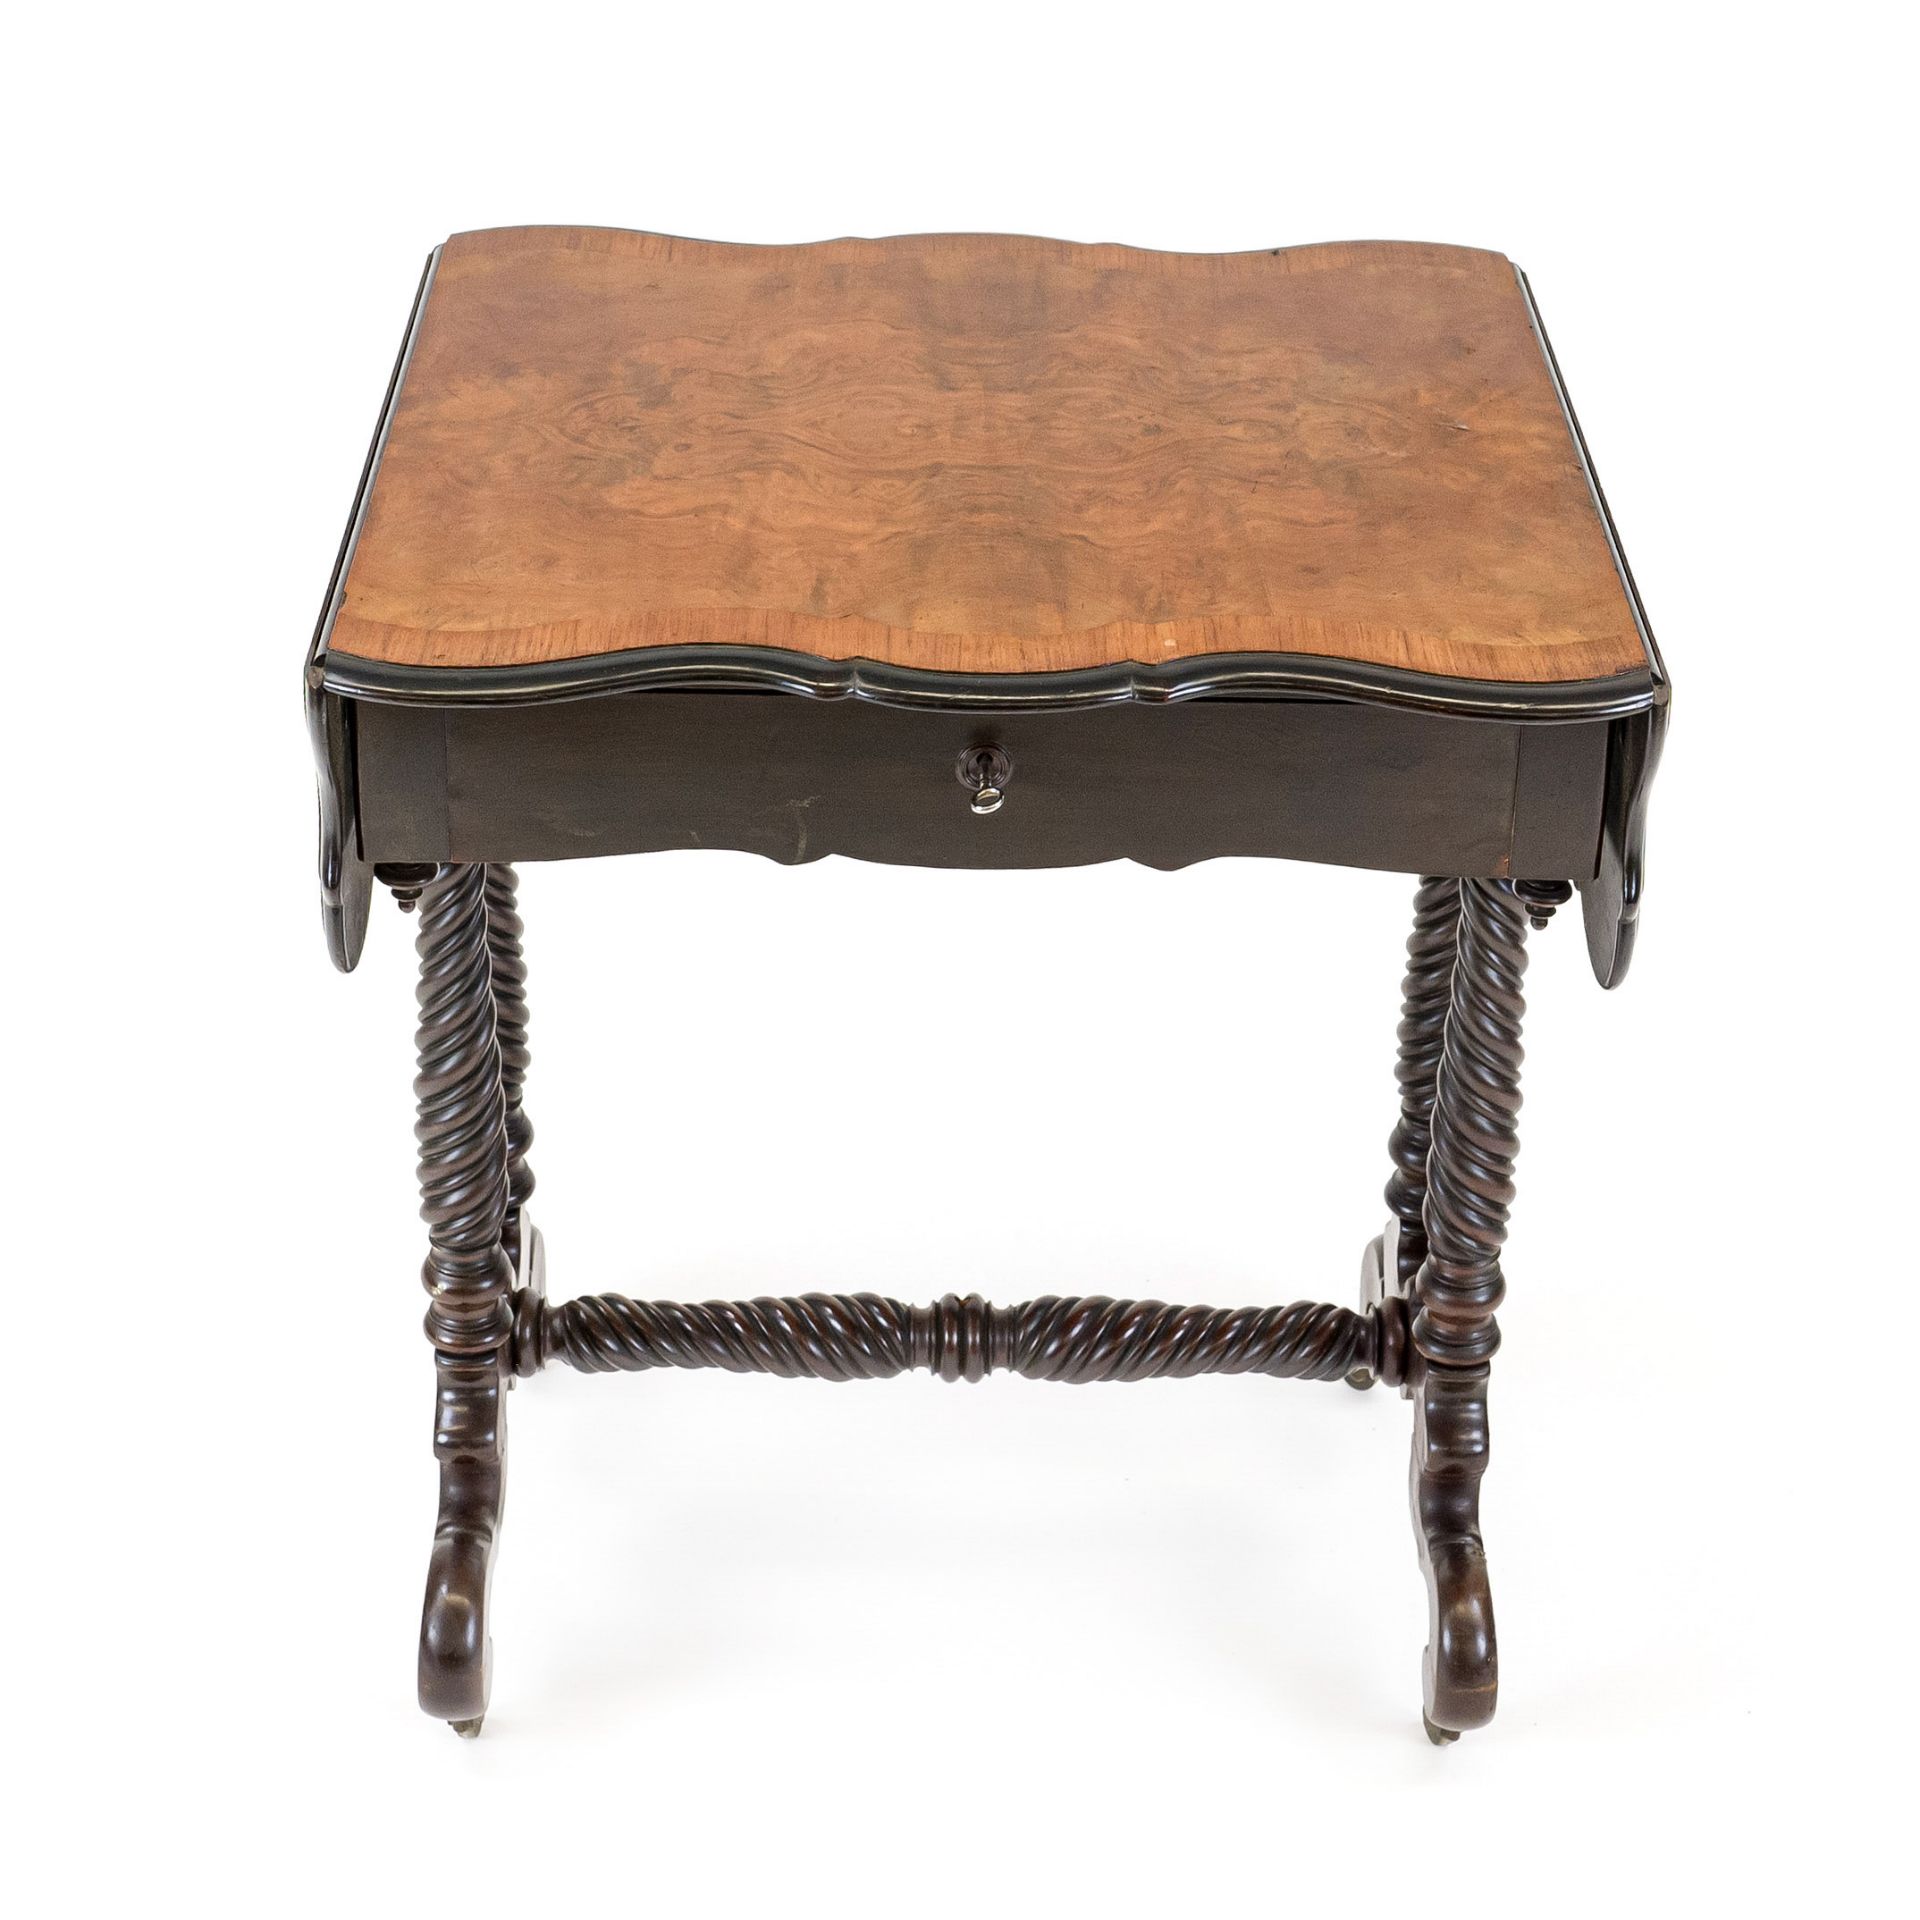 Side table, 19th century, walnut and mahogany, curved hinged top, frame with drawer, turned frame on - Image 2 of 2